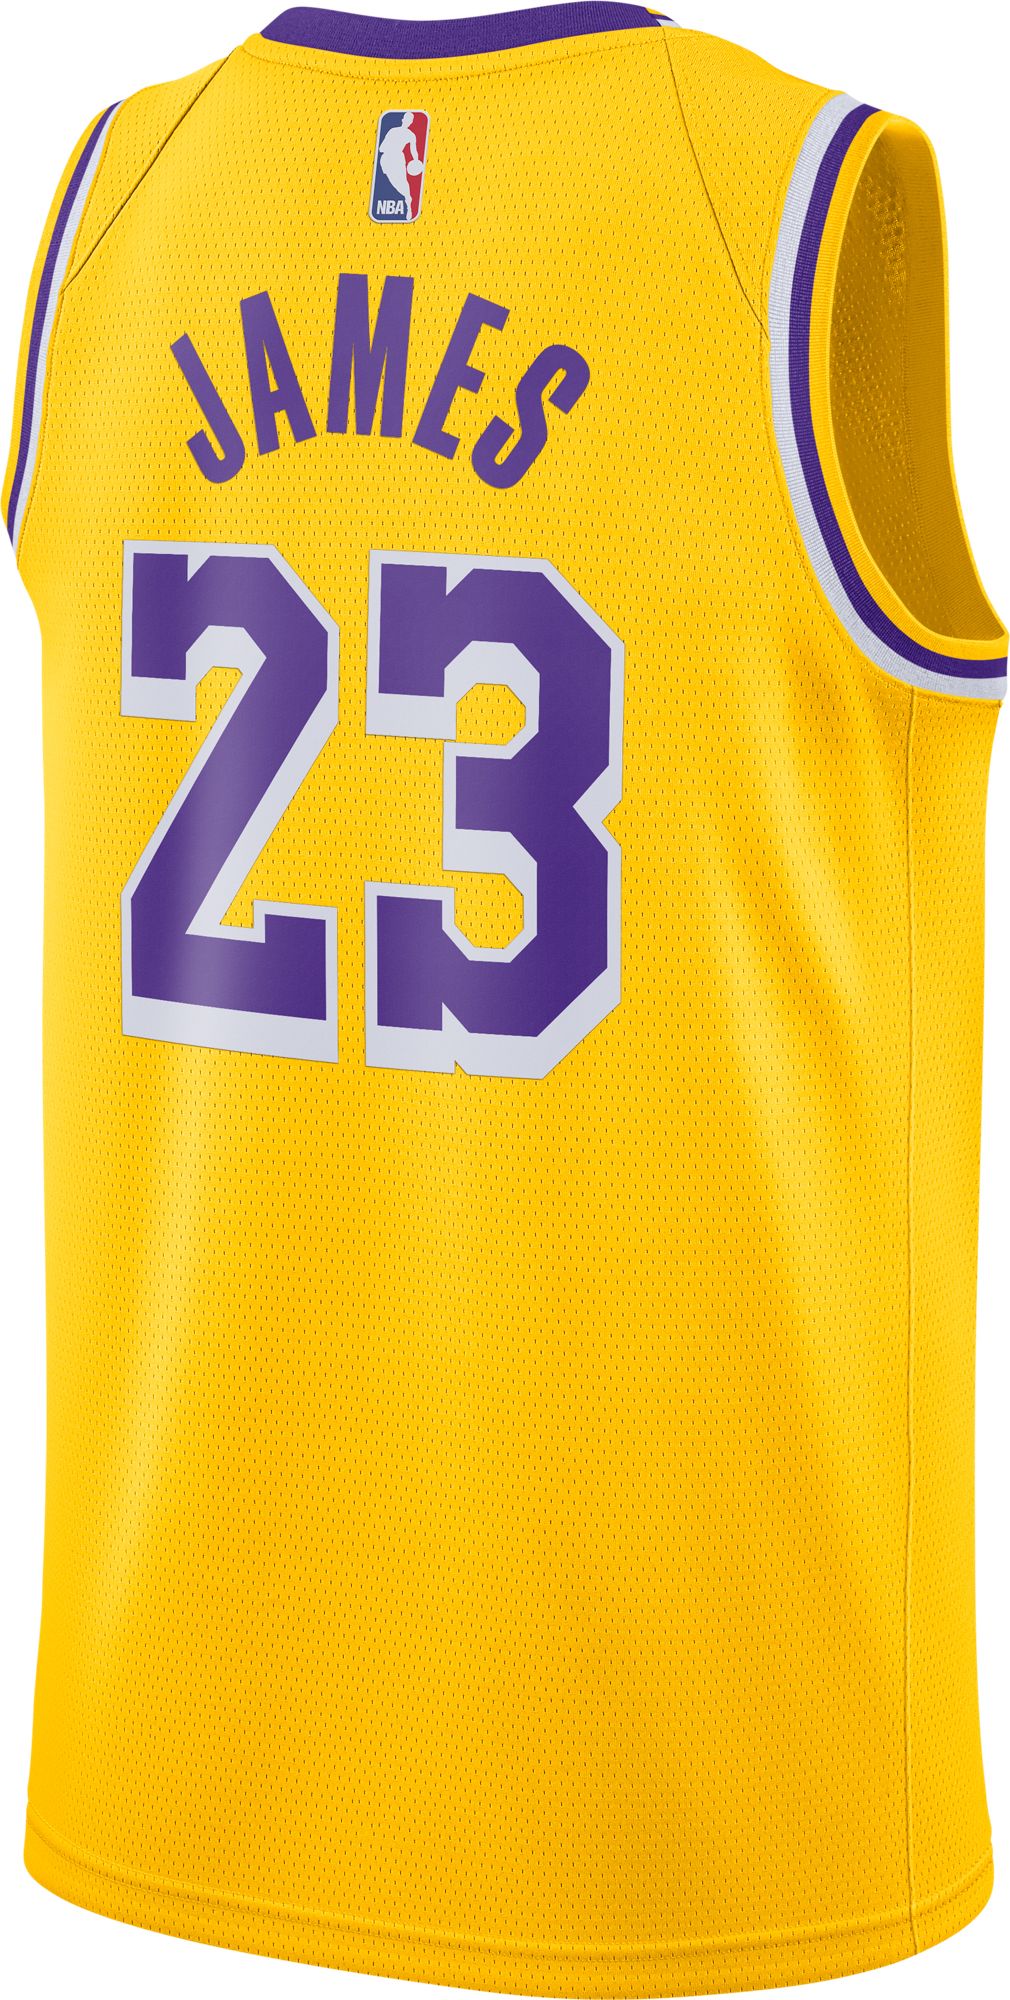 23 lakers jersey